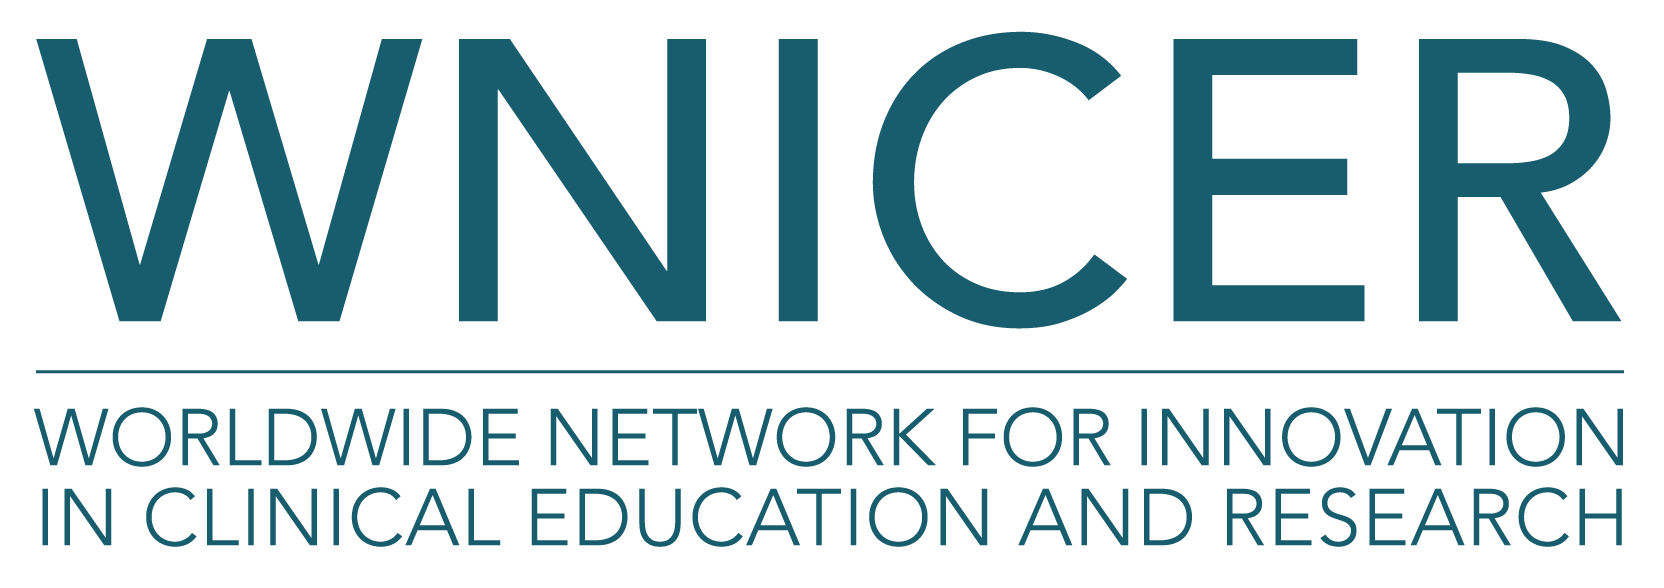 Worldwide Network for Innovation in Clinical Education and Research (WNICER) logo